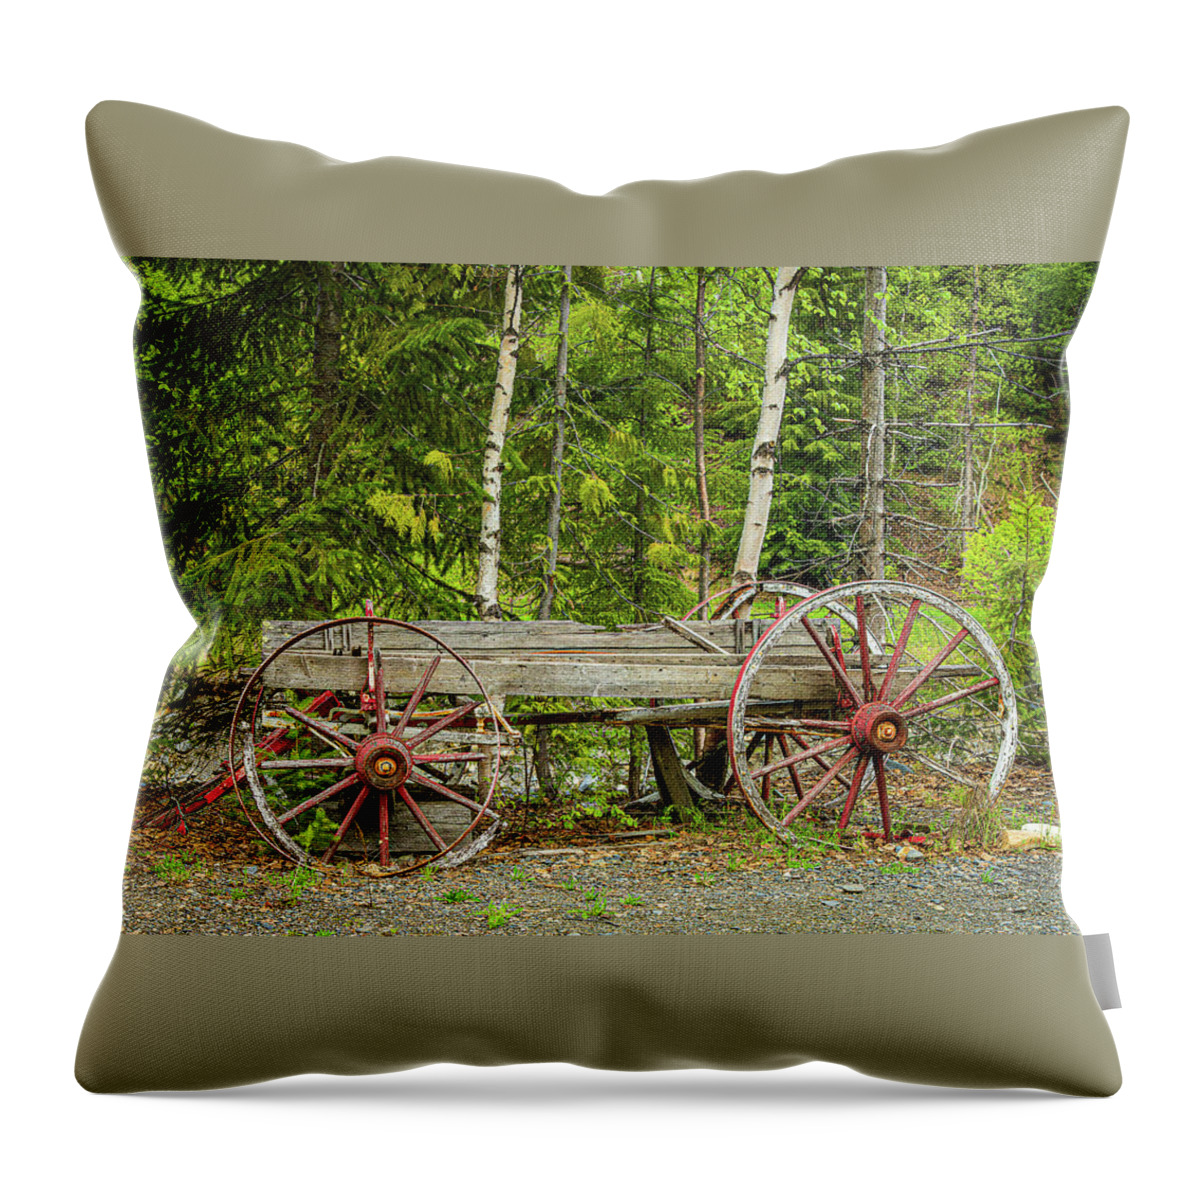 Landscapes Throw Pillow featuring the photograph Broken Wagon by Claude Dalley